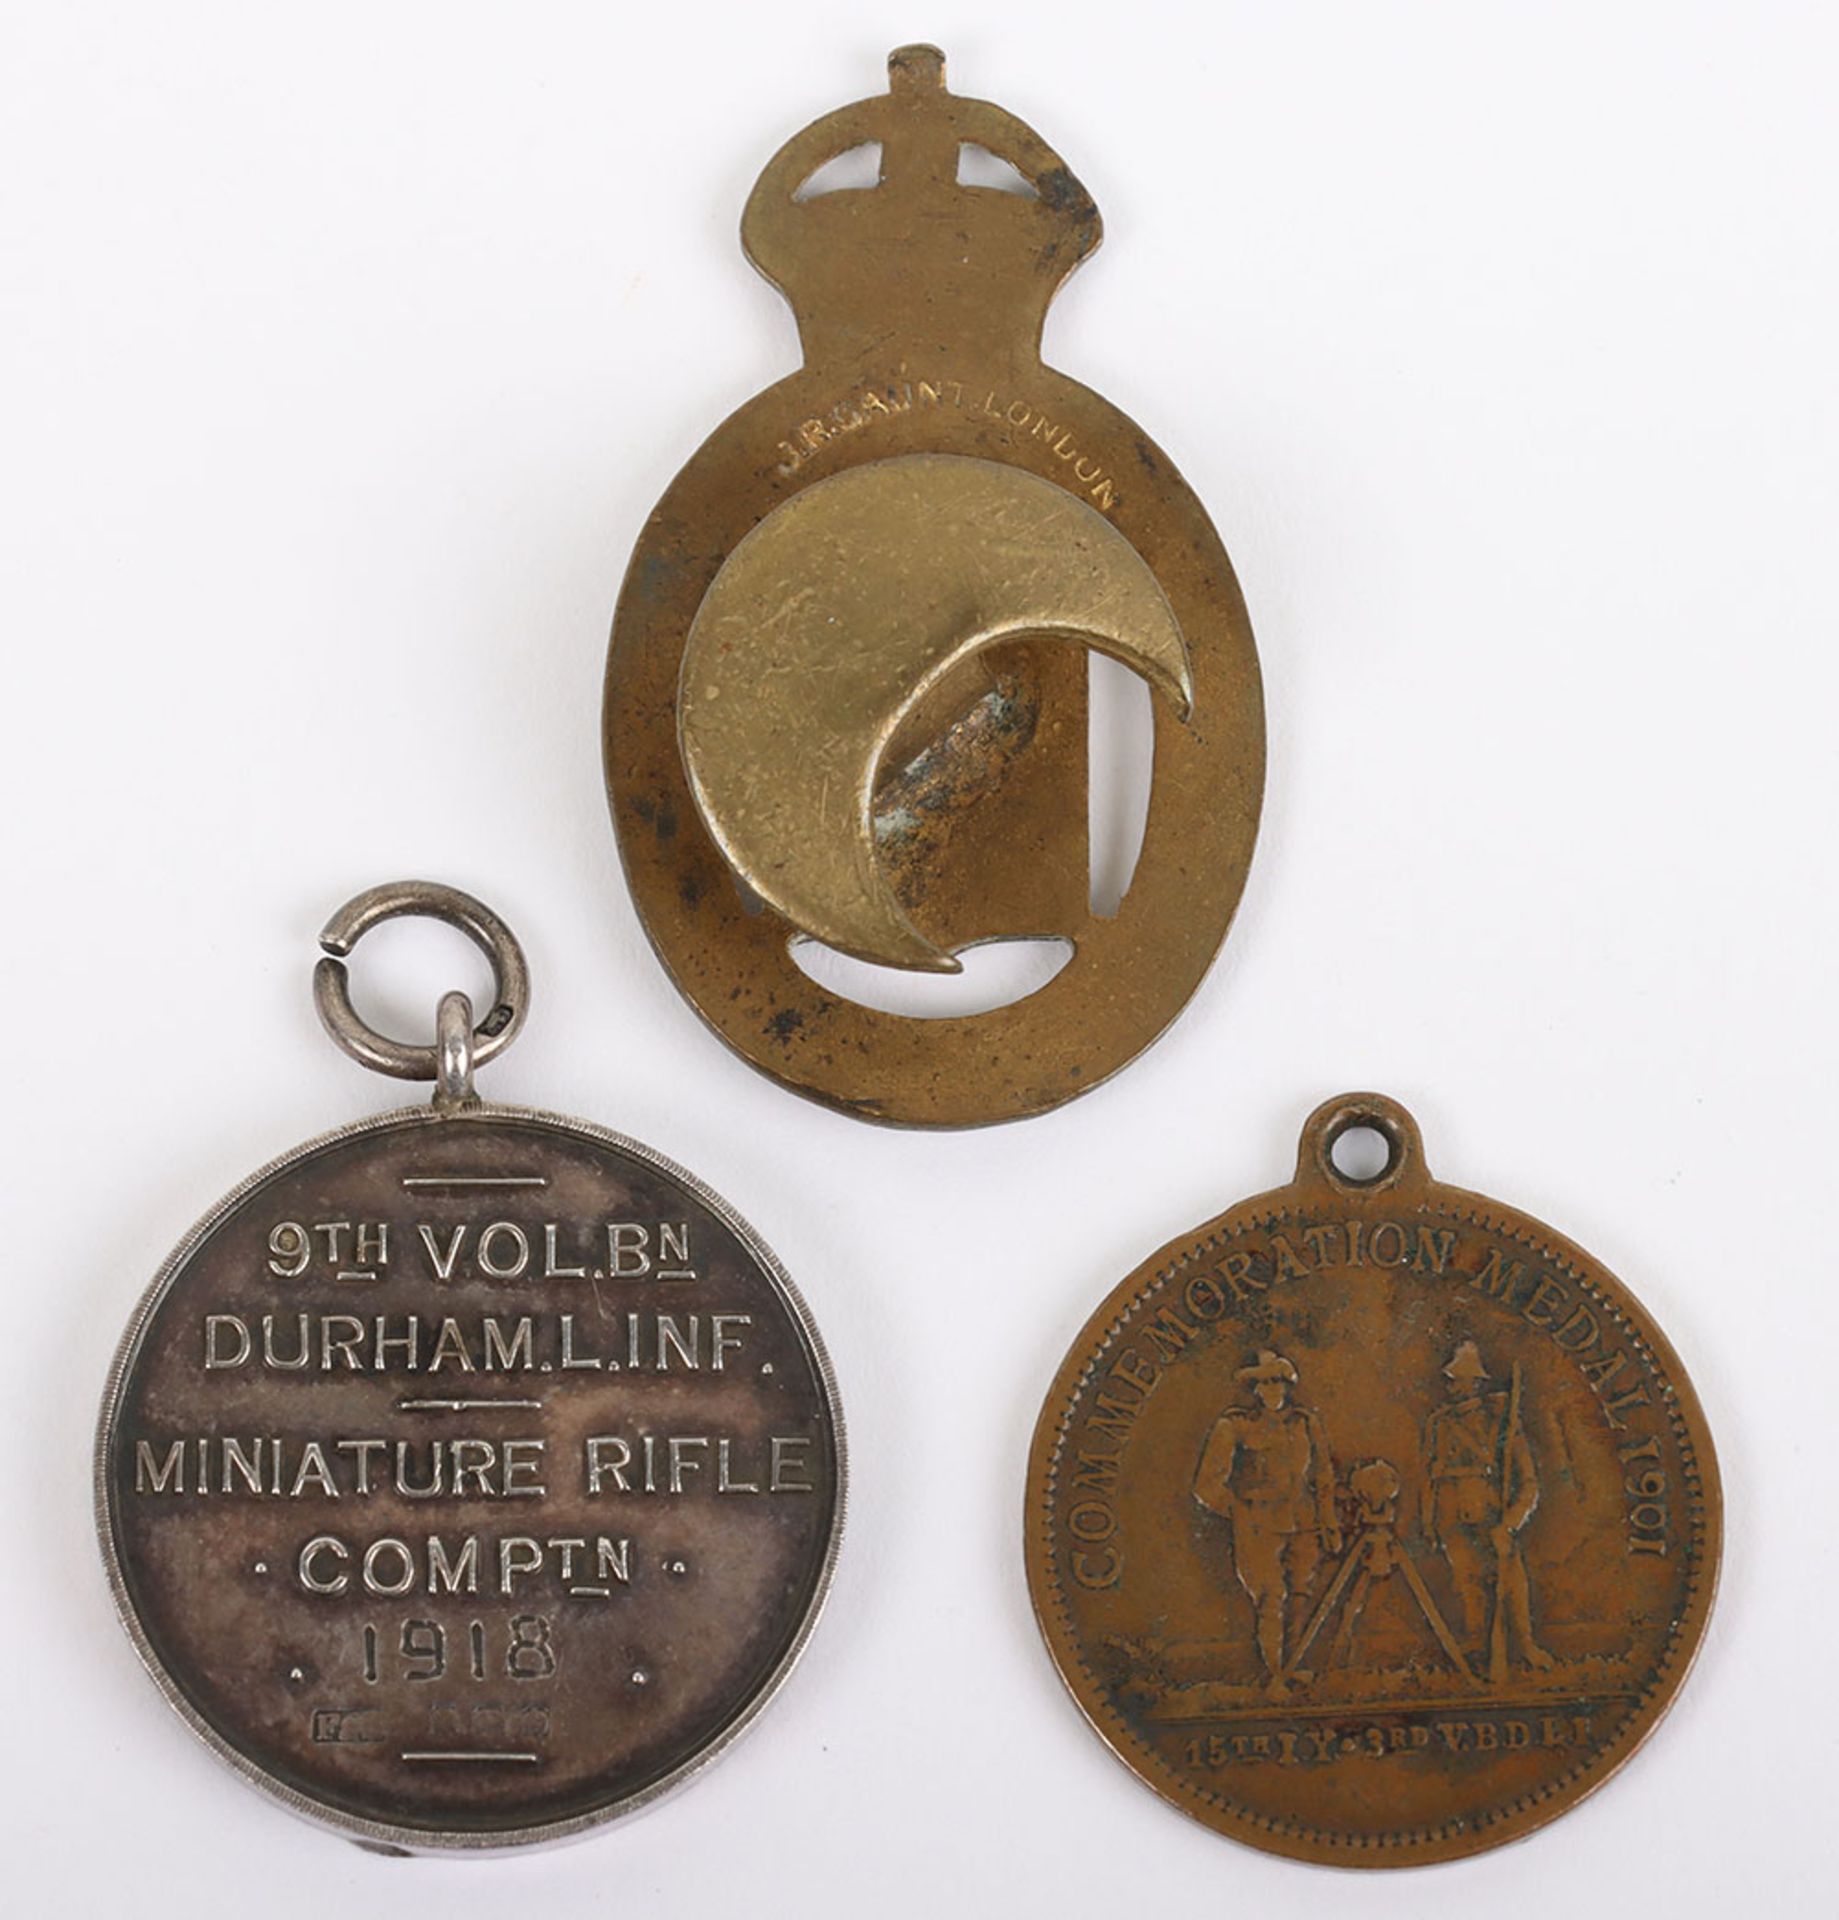 A Collection of Three Badges for Military Service with a Connection to the North East - Image 2 of 2